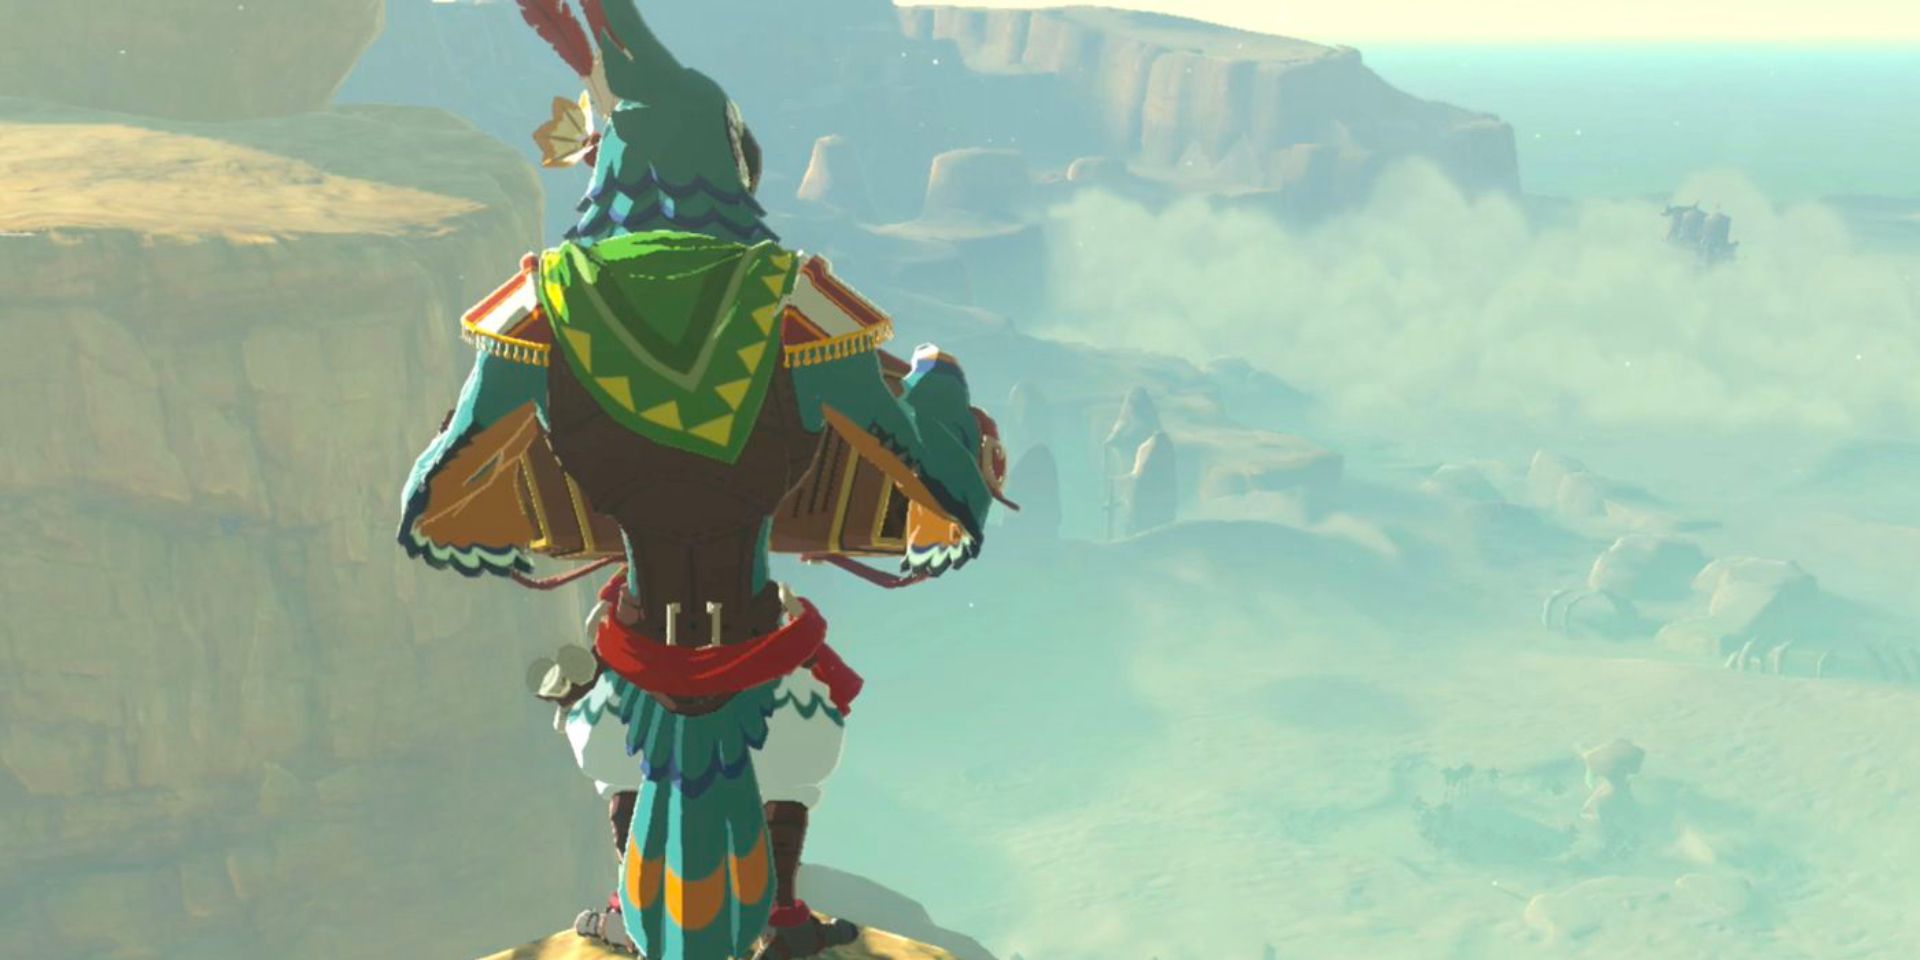 Kass, an Accordion-playing Bird Bard From Breath of the Wild, playing his instrument from a high perch.